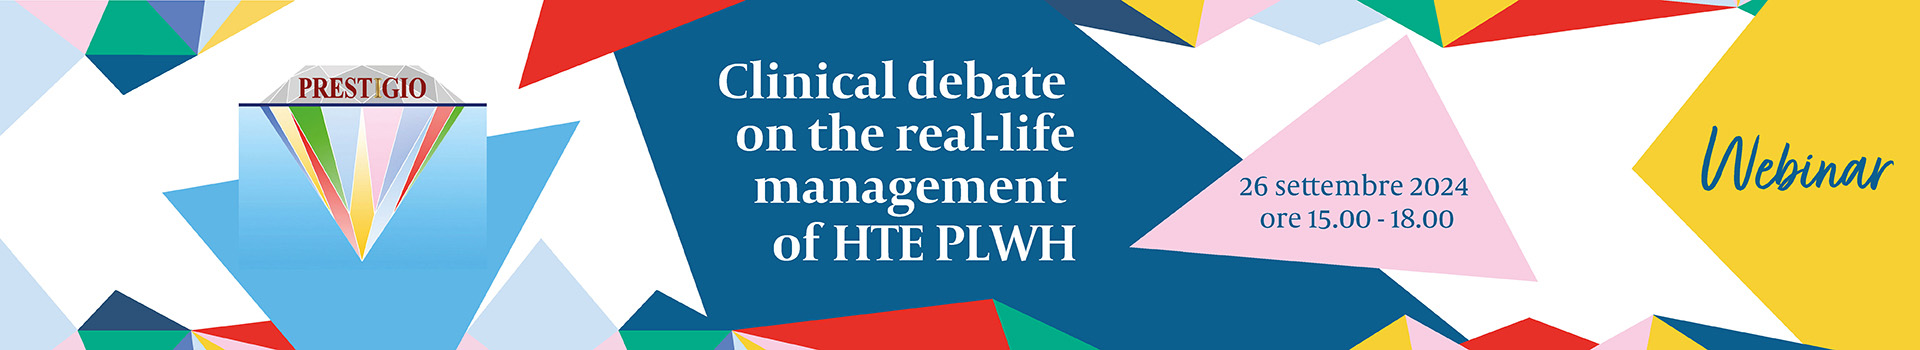 Clinical debate on the real-life management of HTE PLWH